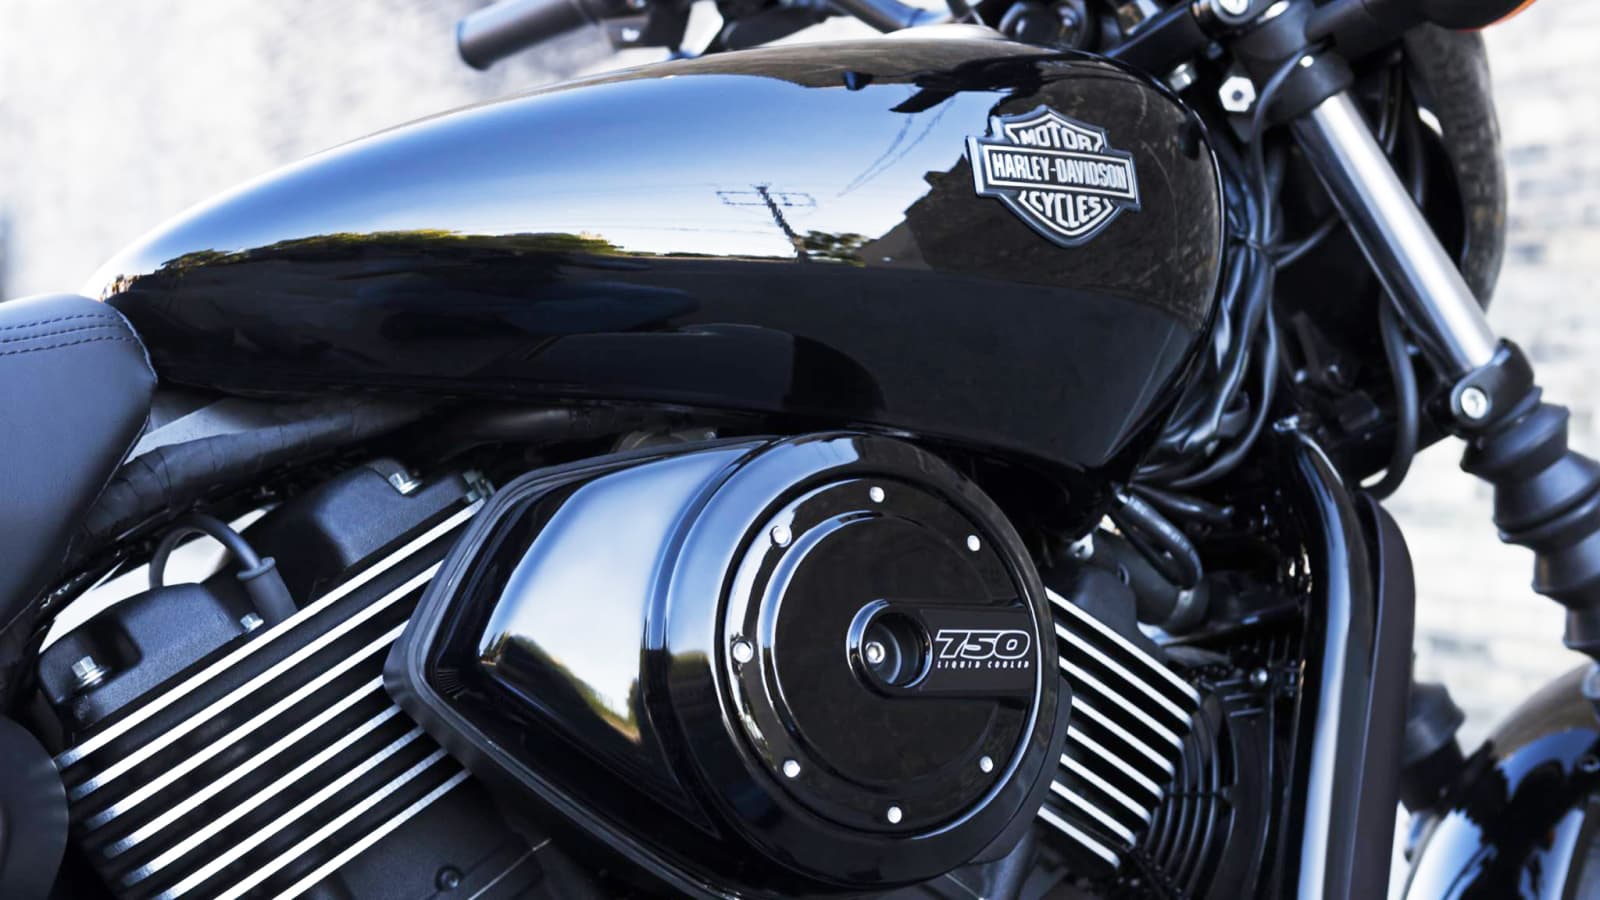 New owner rides into town for Santa Fe Harley-Davidson - Business -  santafenewmexican.com